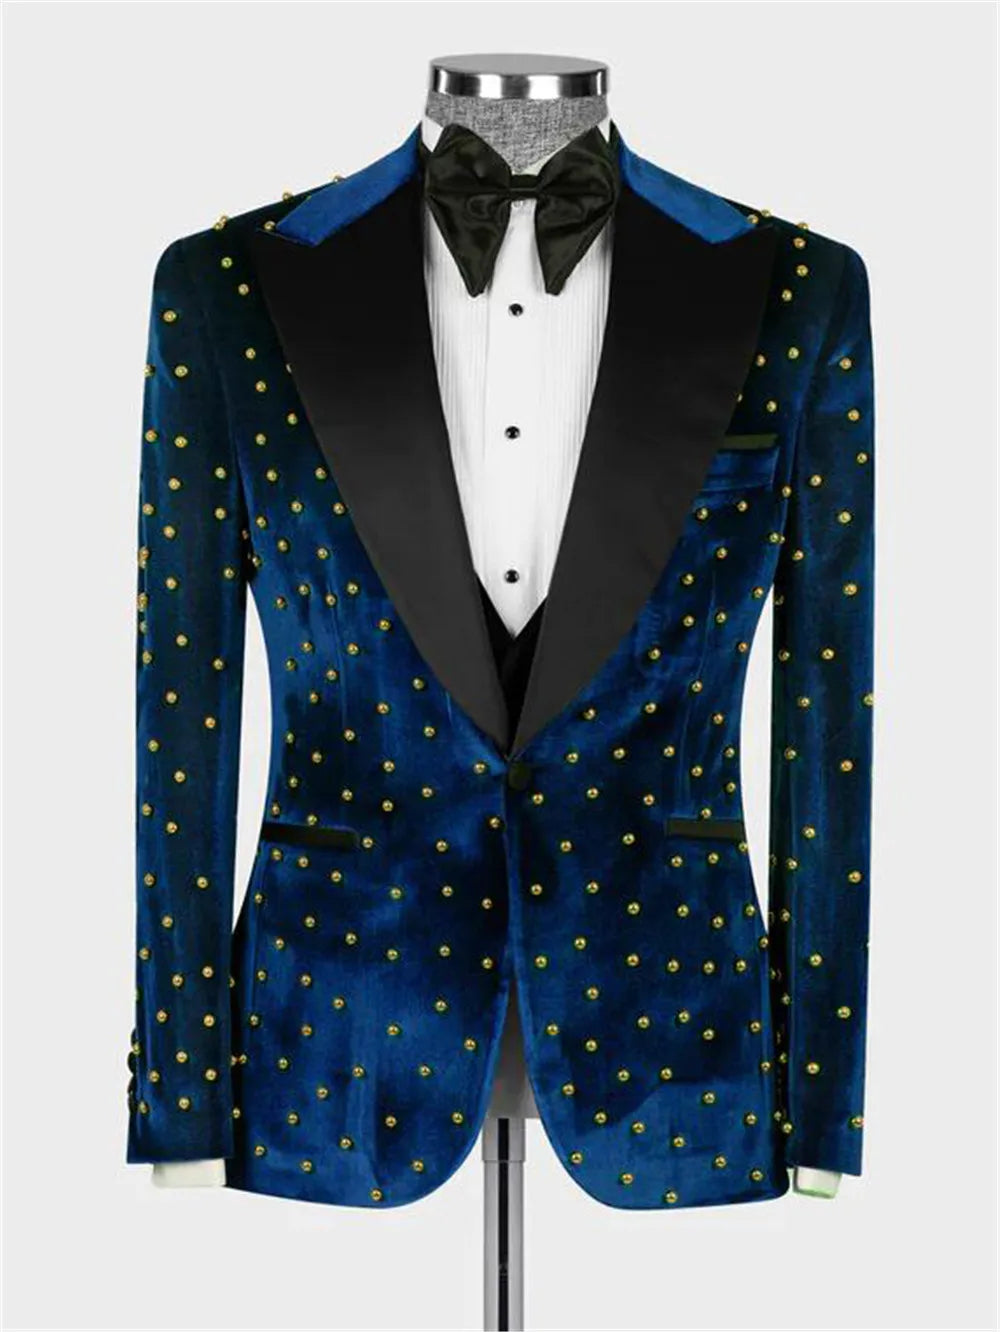 Man Velvet Suits With Handmade Gold Pearls Groom Wedding Tuxedos Custom Made Black Peaked Lapel 3 Pieces Formal Prom Blazer Sets